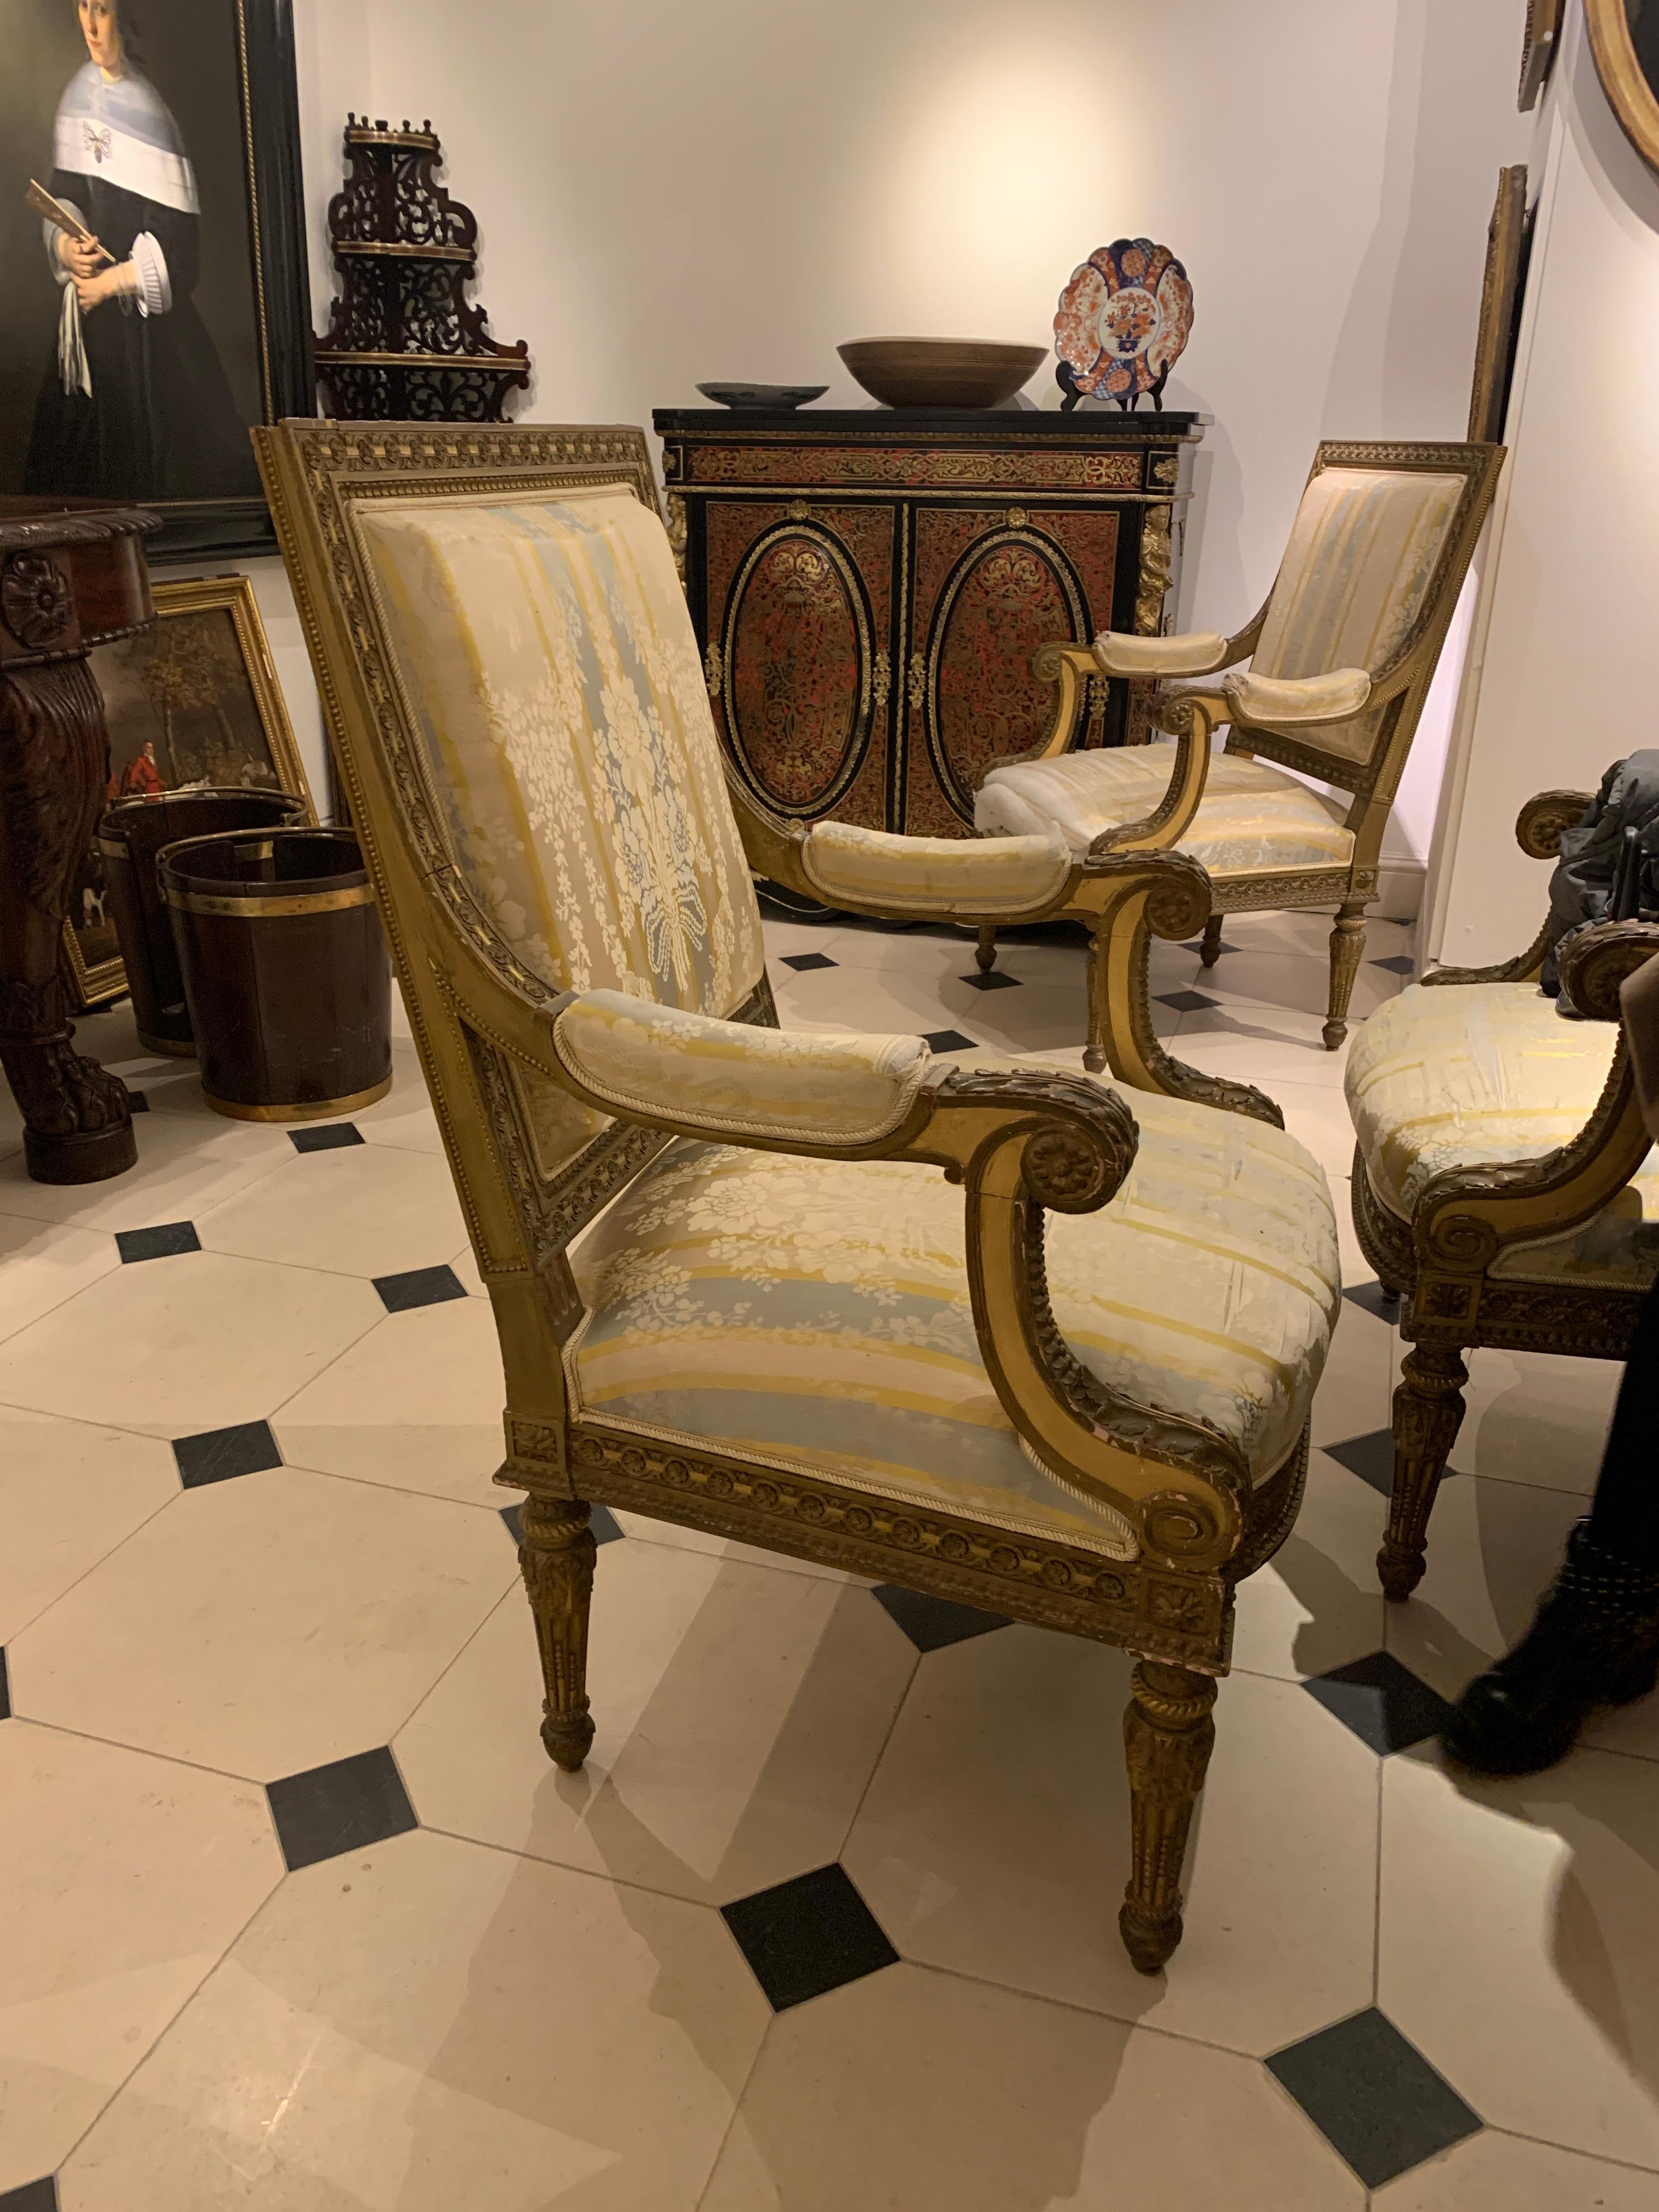 Set of Four Chairs or Pair of Chairs
French Louis XV Salon Chairs, ornately carved with original gilding. Covered in lemon damask at present - in need reupholstering.

Price for set; £12,500
Price for a Pair; £6,800